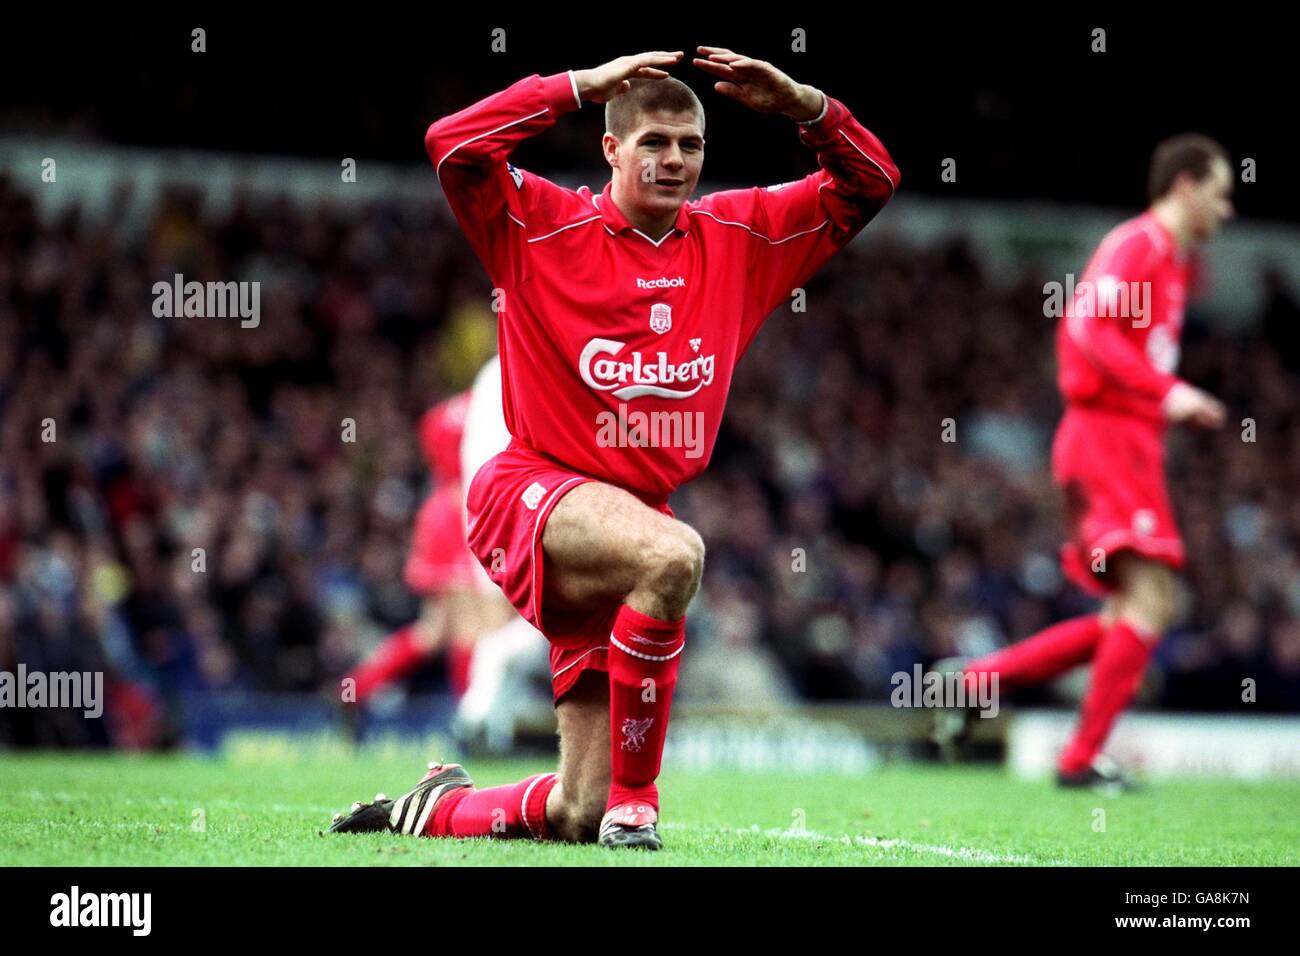 Soccer - FA Barclaycard Premiership - Leeds United v Liverpool. Liverpool's Steven Gerrard puts his hands on his head after missing a chance Stock Photo